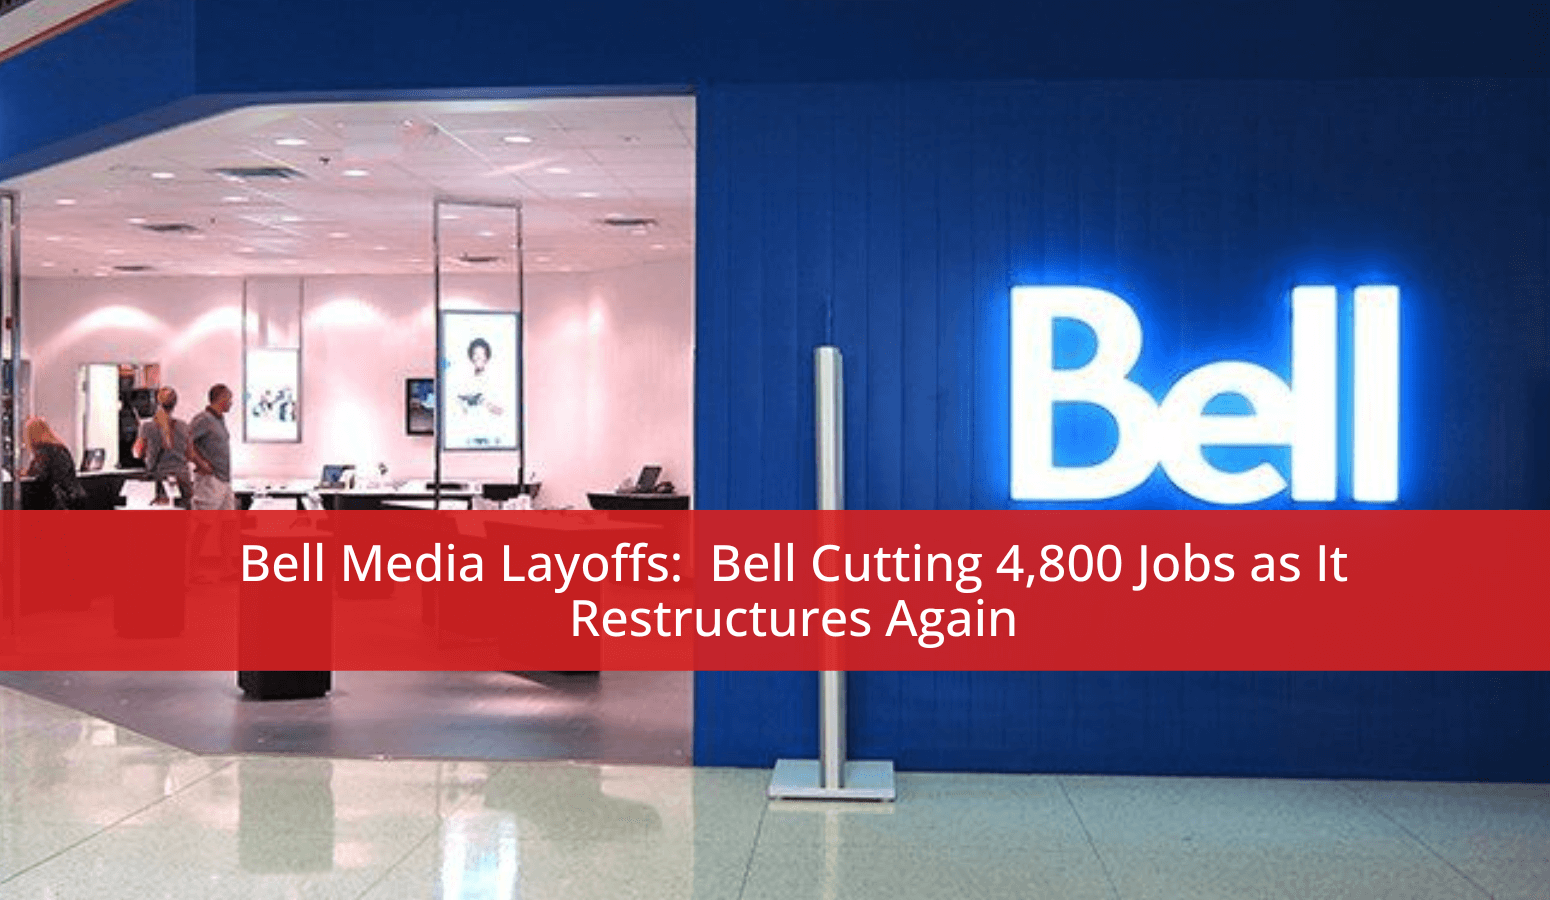 Featured image for “Bell Media Layoffs: Bell Cutting 4,800 Jobs as It Restructures Again”